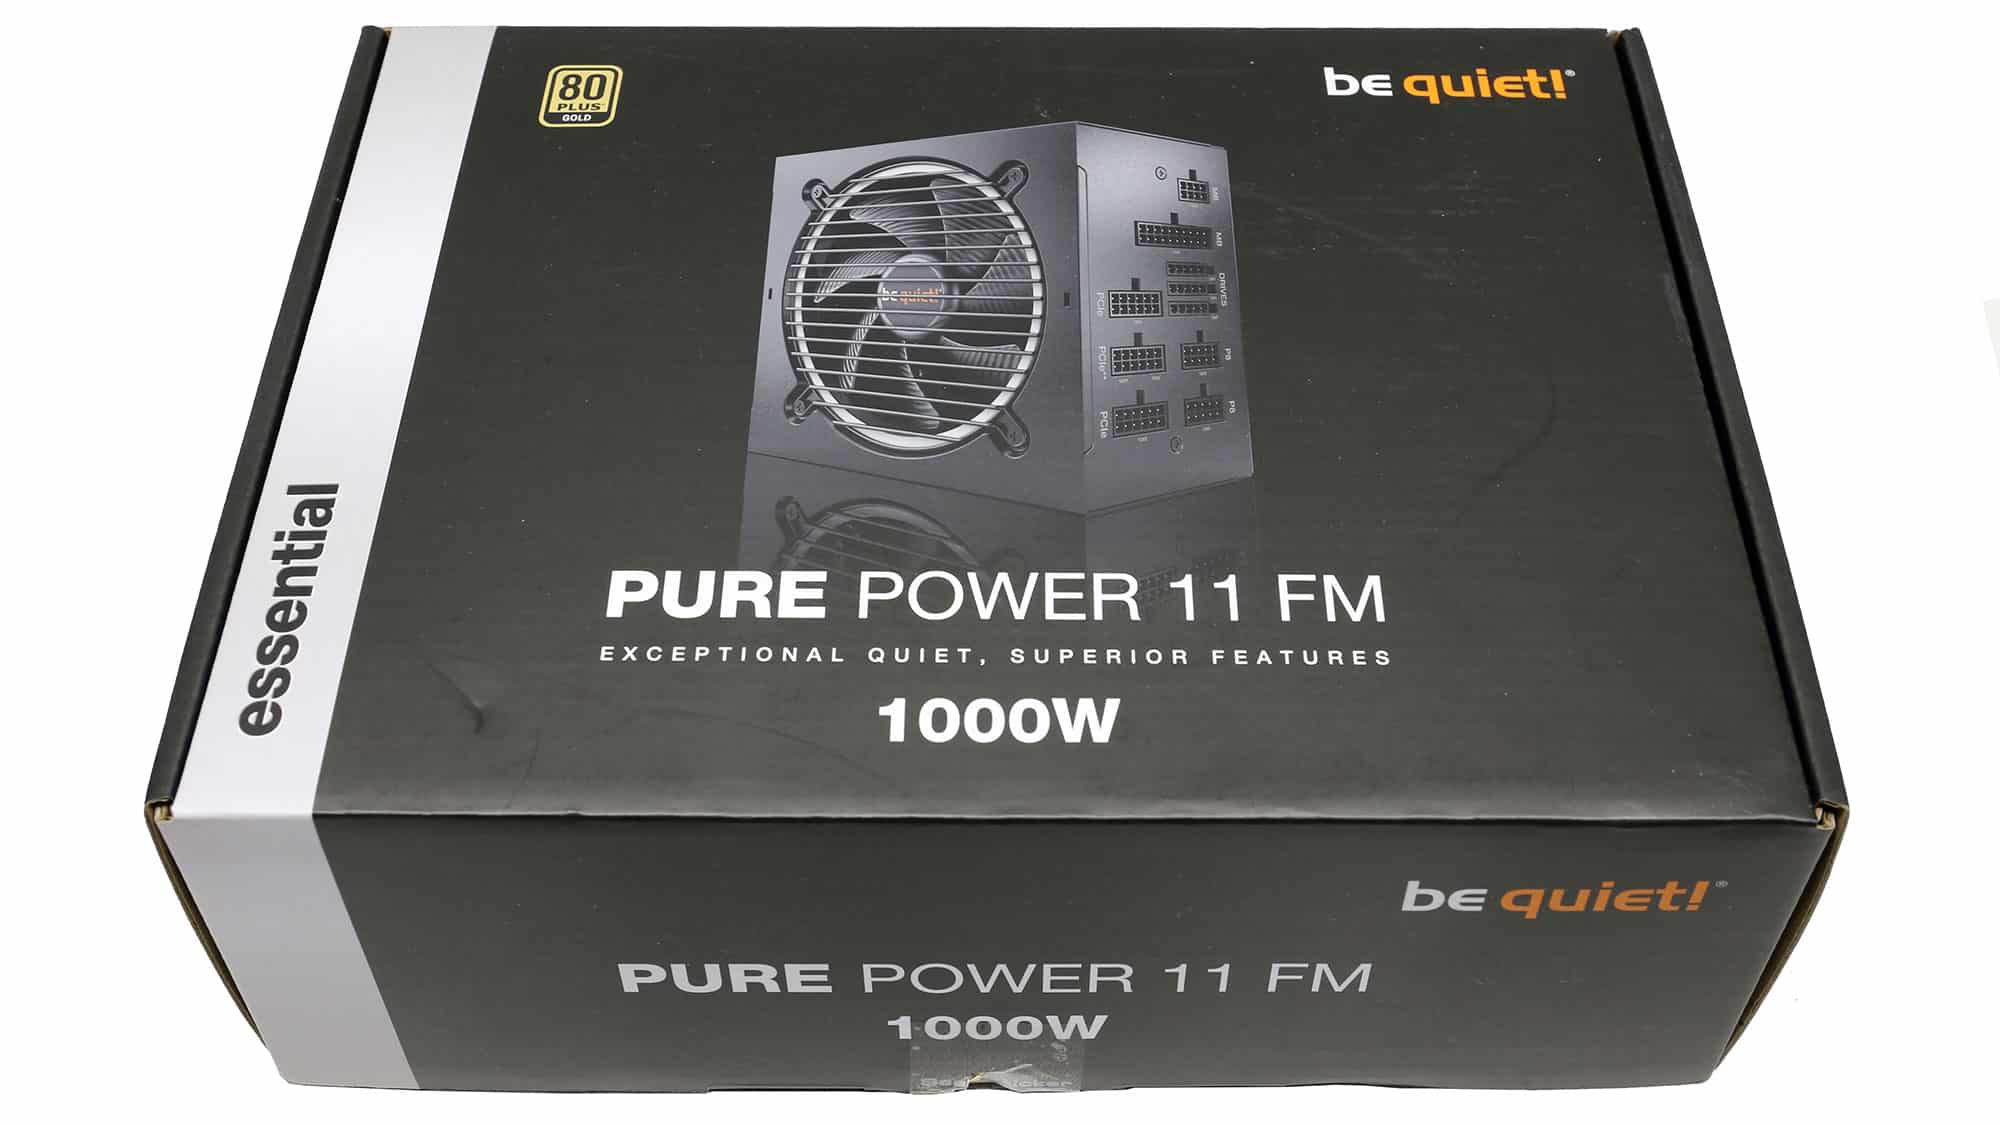 be quiet! Pure Power 11 FM 1000W Report (Page 1 of 4)